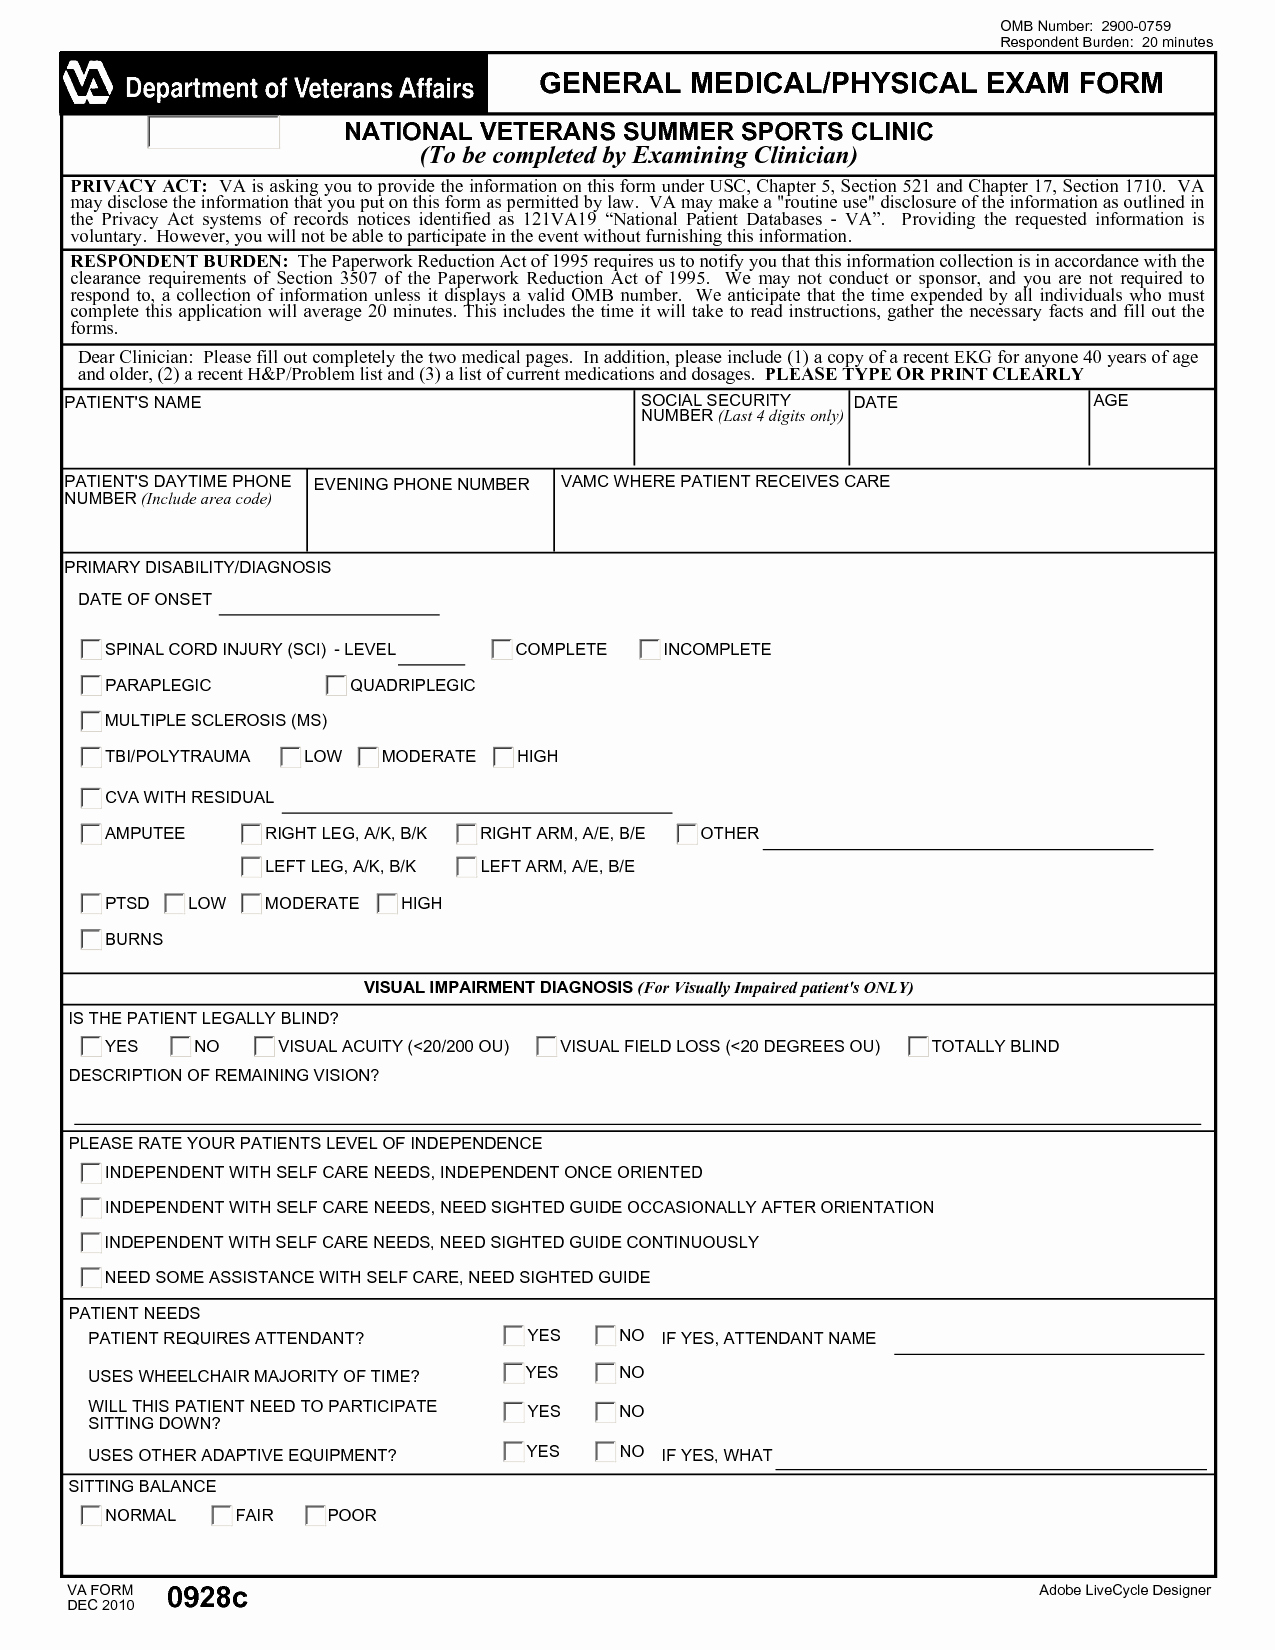 Medical Physical form for Employment Fresh 9 Best Of Medical Physical Examination forms